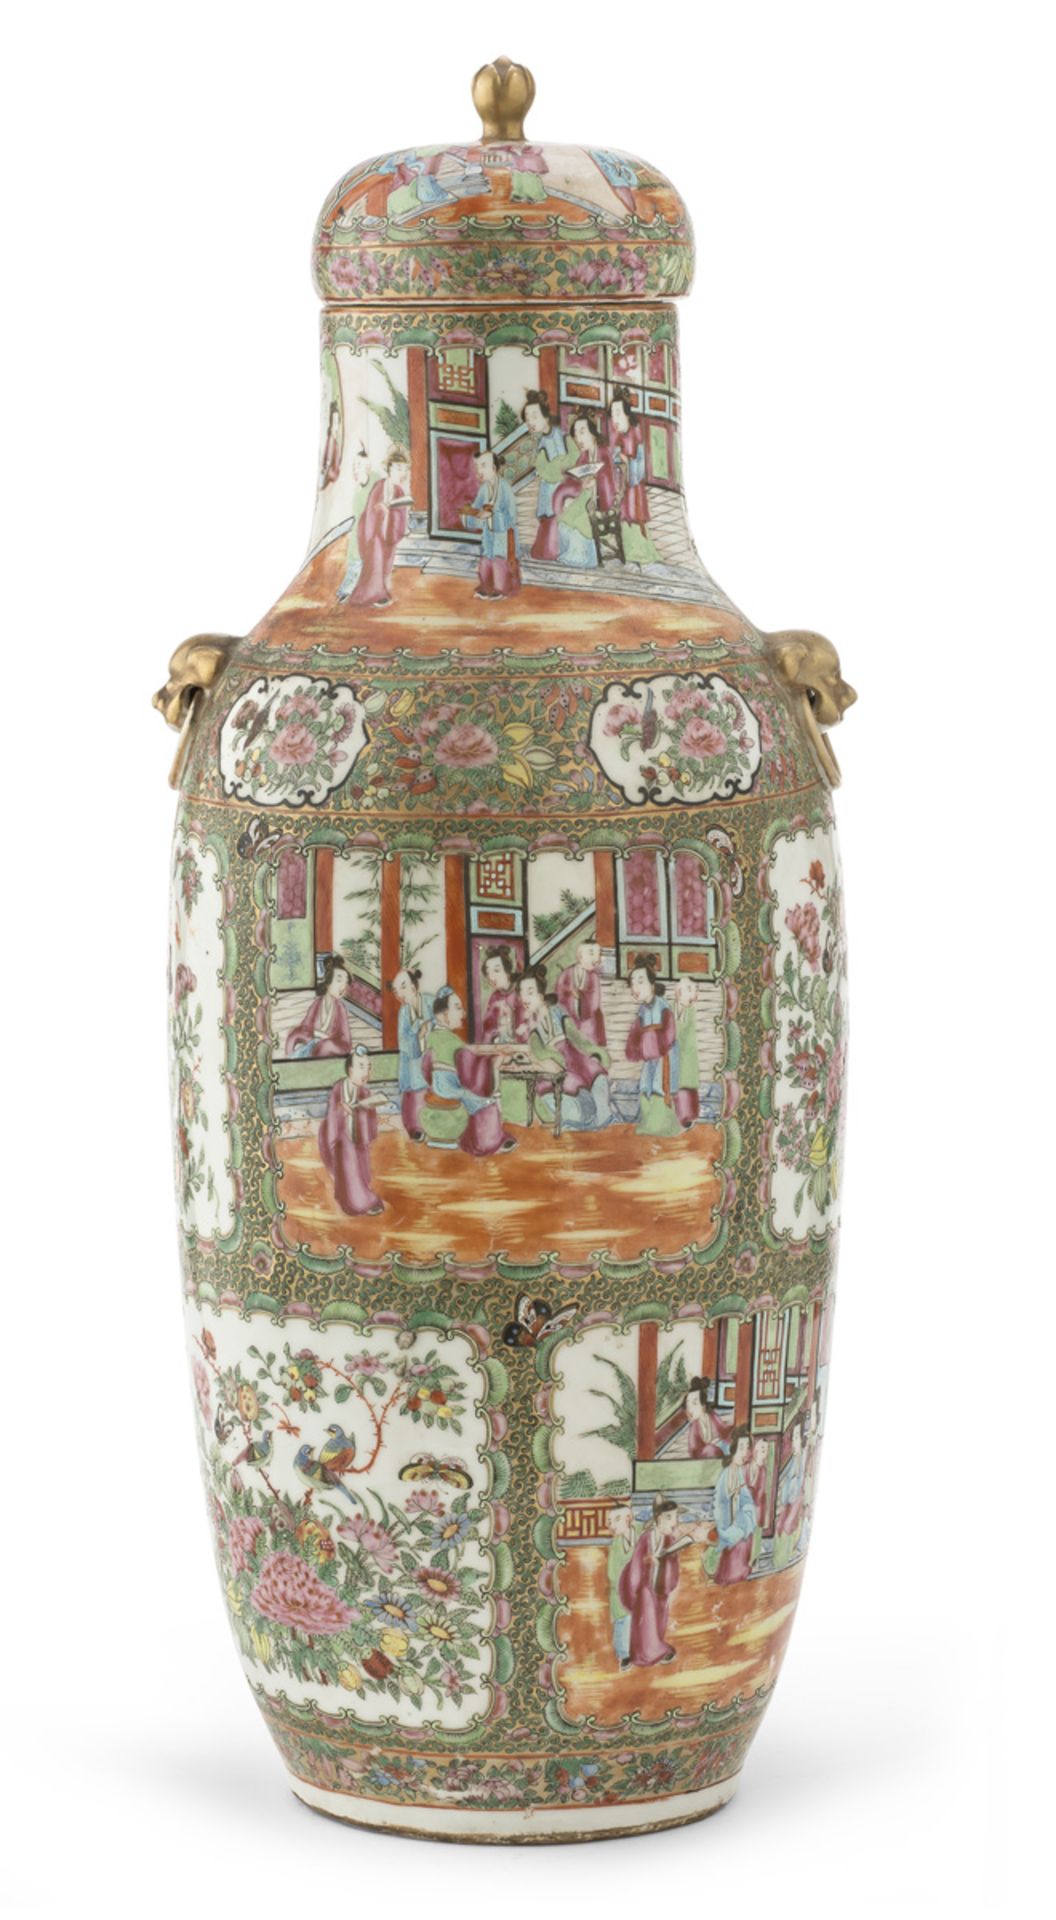 BIG PORCELAIN VASE IN POLYCHROME AND GOLD ENAMELS CHINA 19TH CENTURY